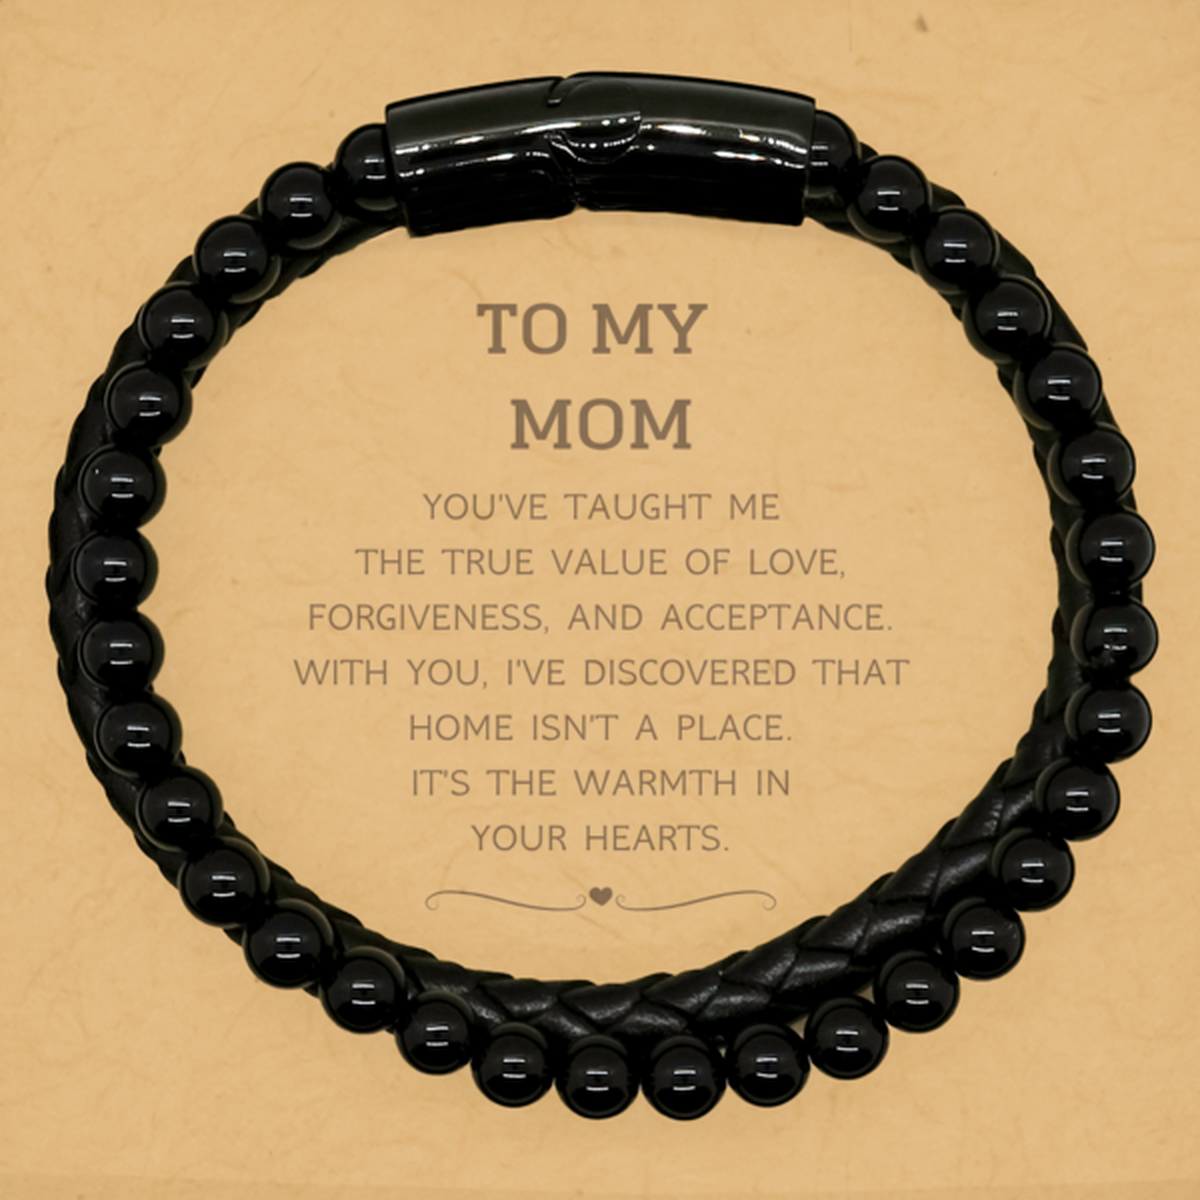 To My Mom Gifts, You've taught me the true value of love, Thank You Gifts For Mom, Birthday Stone Leather Bracelets For Mom